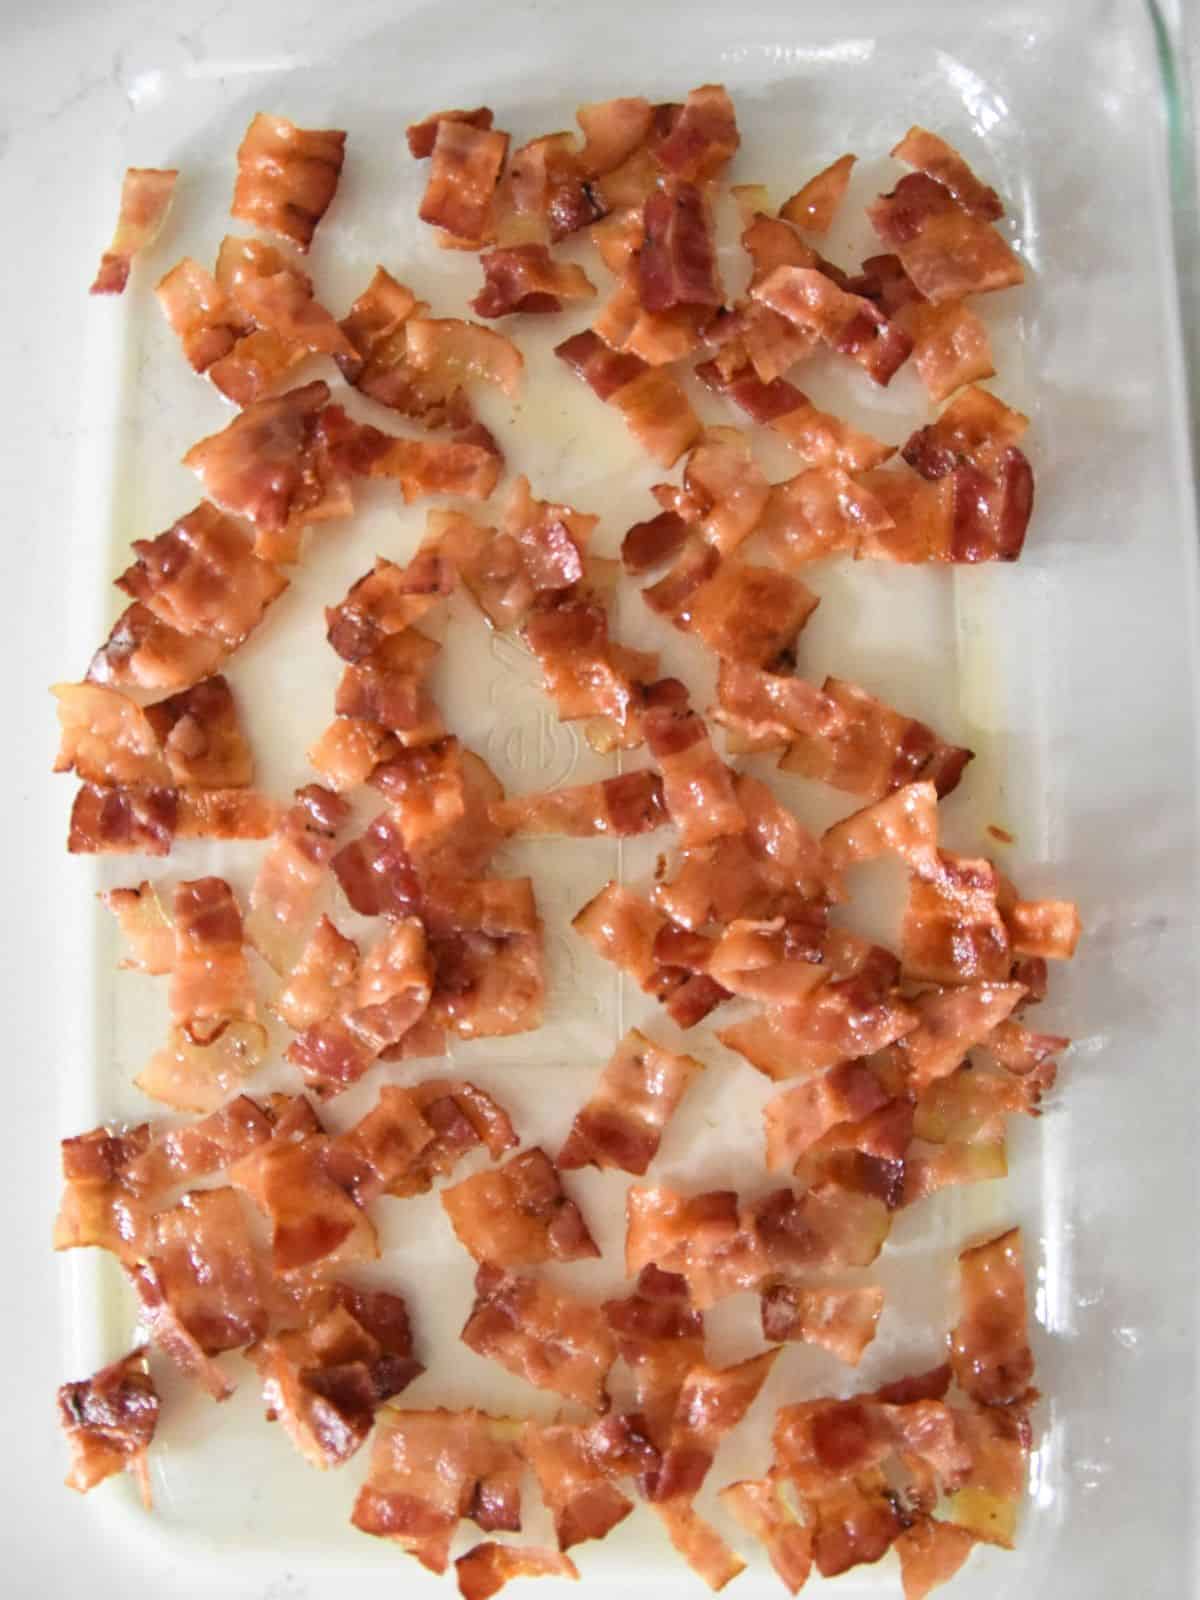 crumbled bacon on casserole dish.